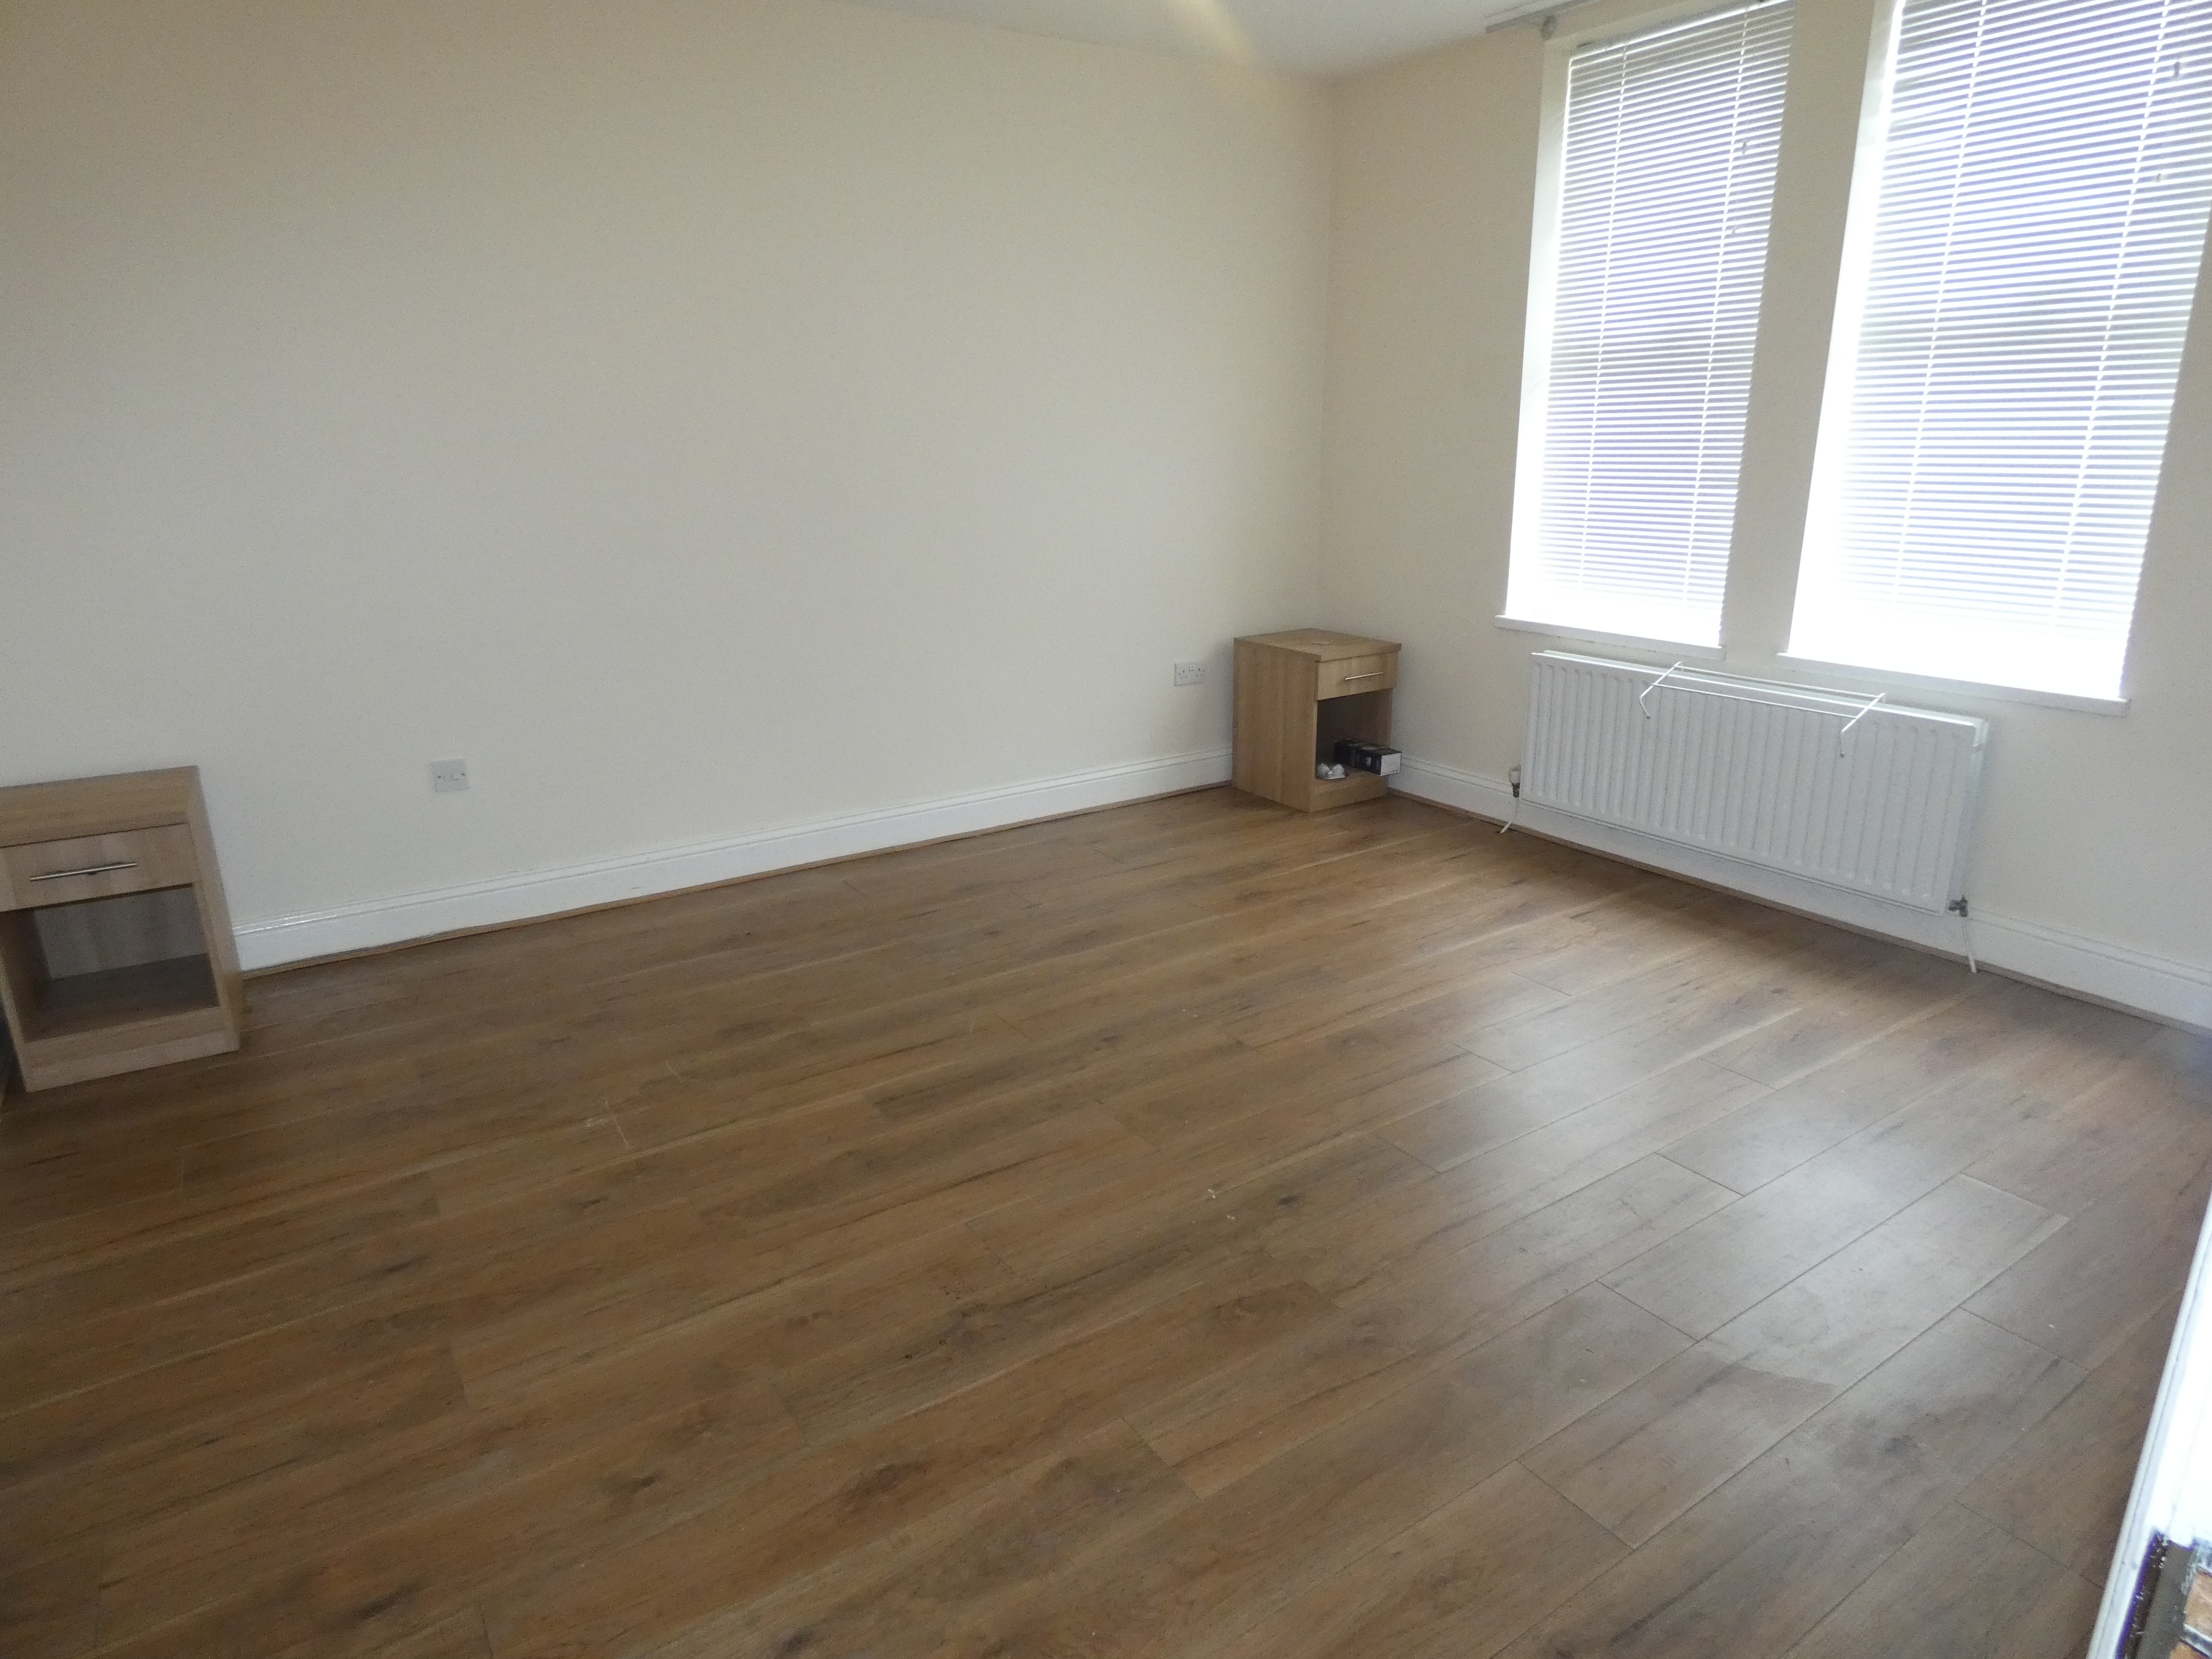 2 bed flat to rent in Hazlerigg, Newcastle upon tyne  - Property Image 2